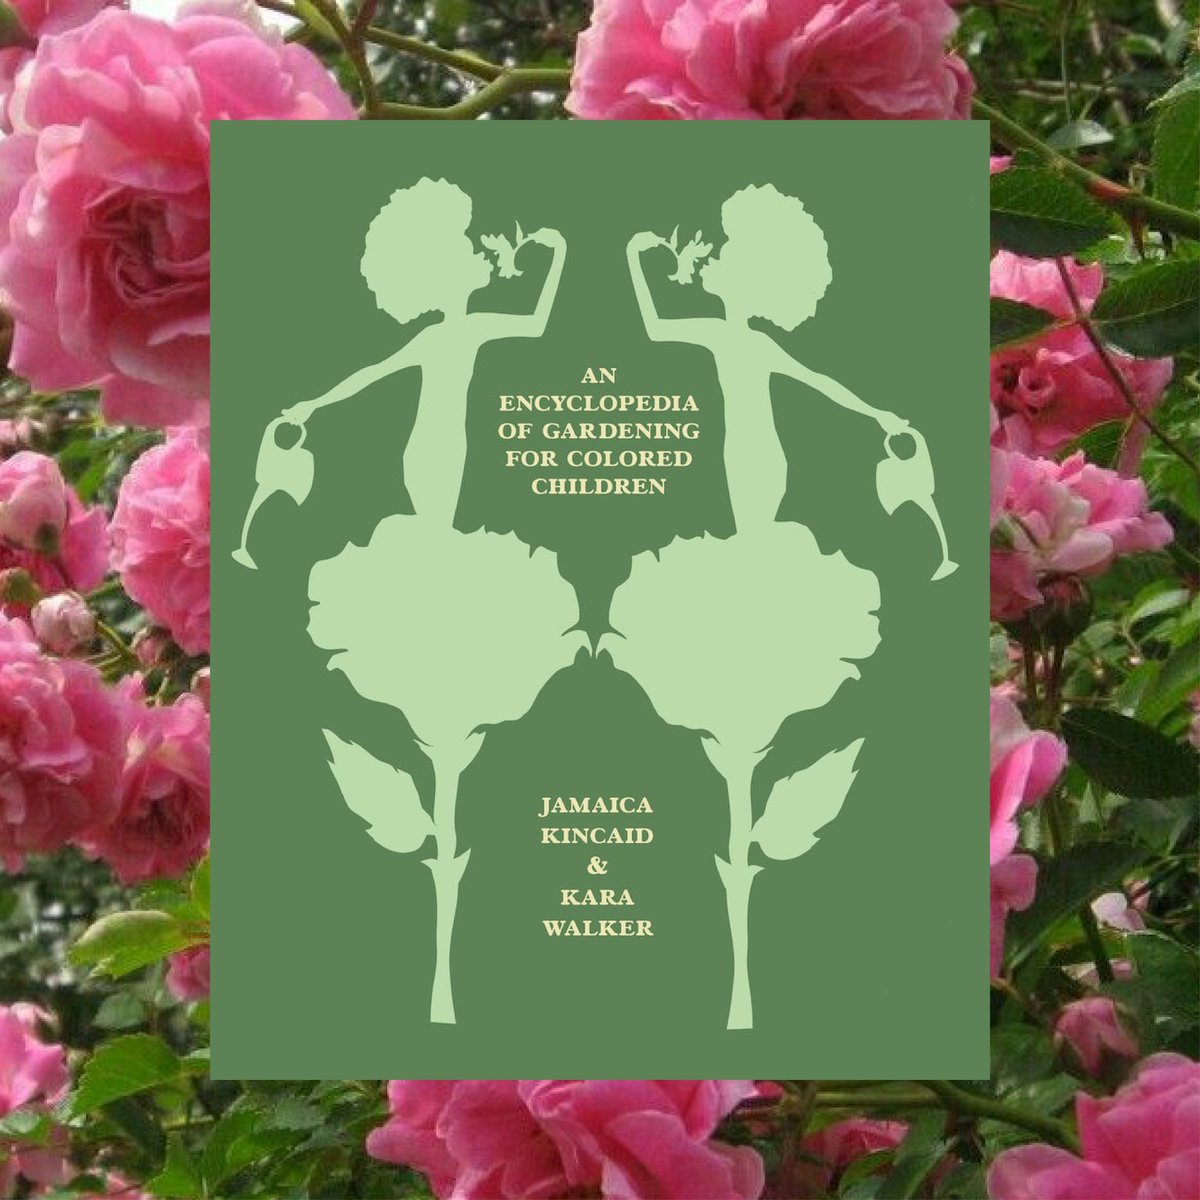 For #NationalGardeningWeek, we would like to spotlight our legendary author Jamaica Kincaid's 'An Encyclopedia of Gardening for Colored Children', a unique collaboration which offers an ABC of the plants that define our world and reveals the often-brutal history behind them.